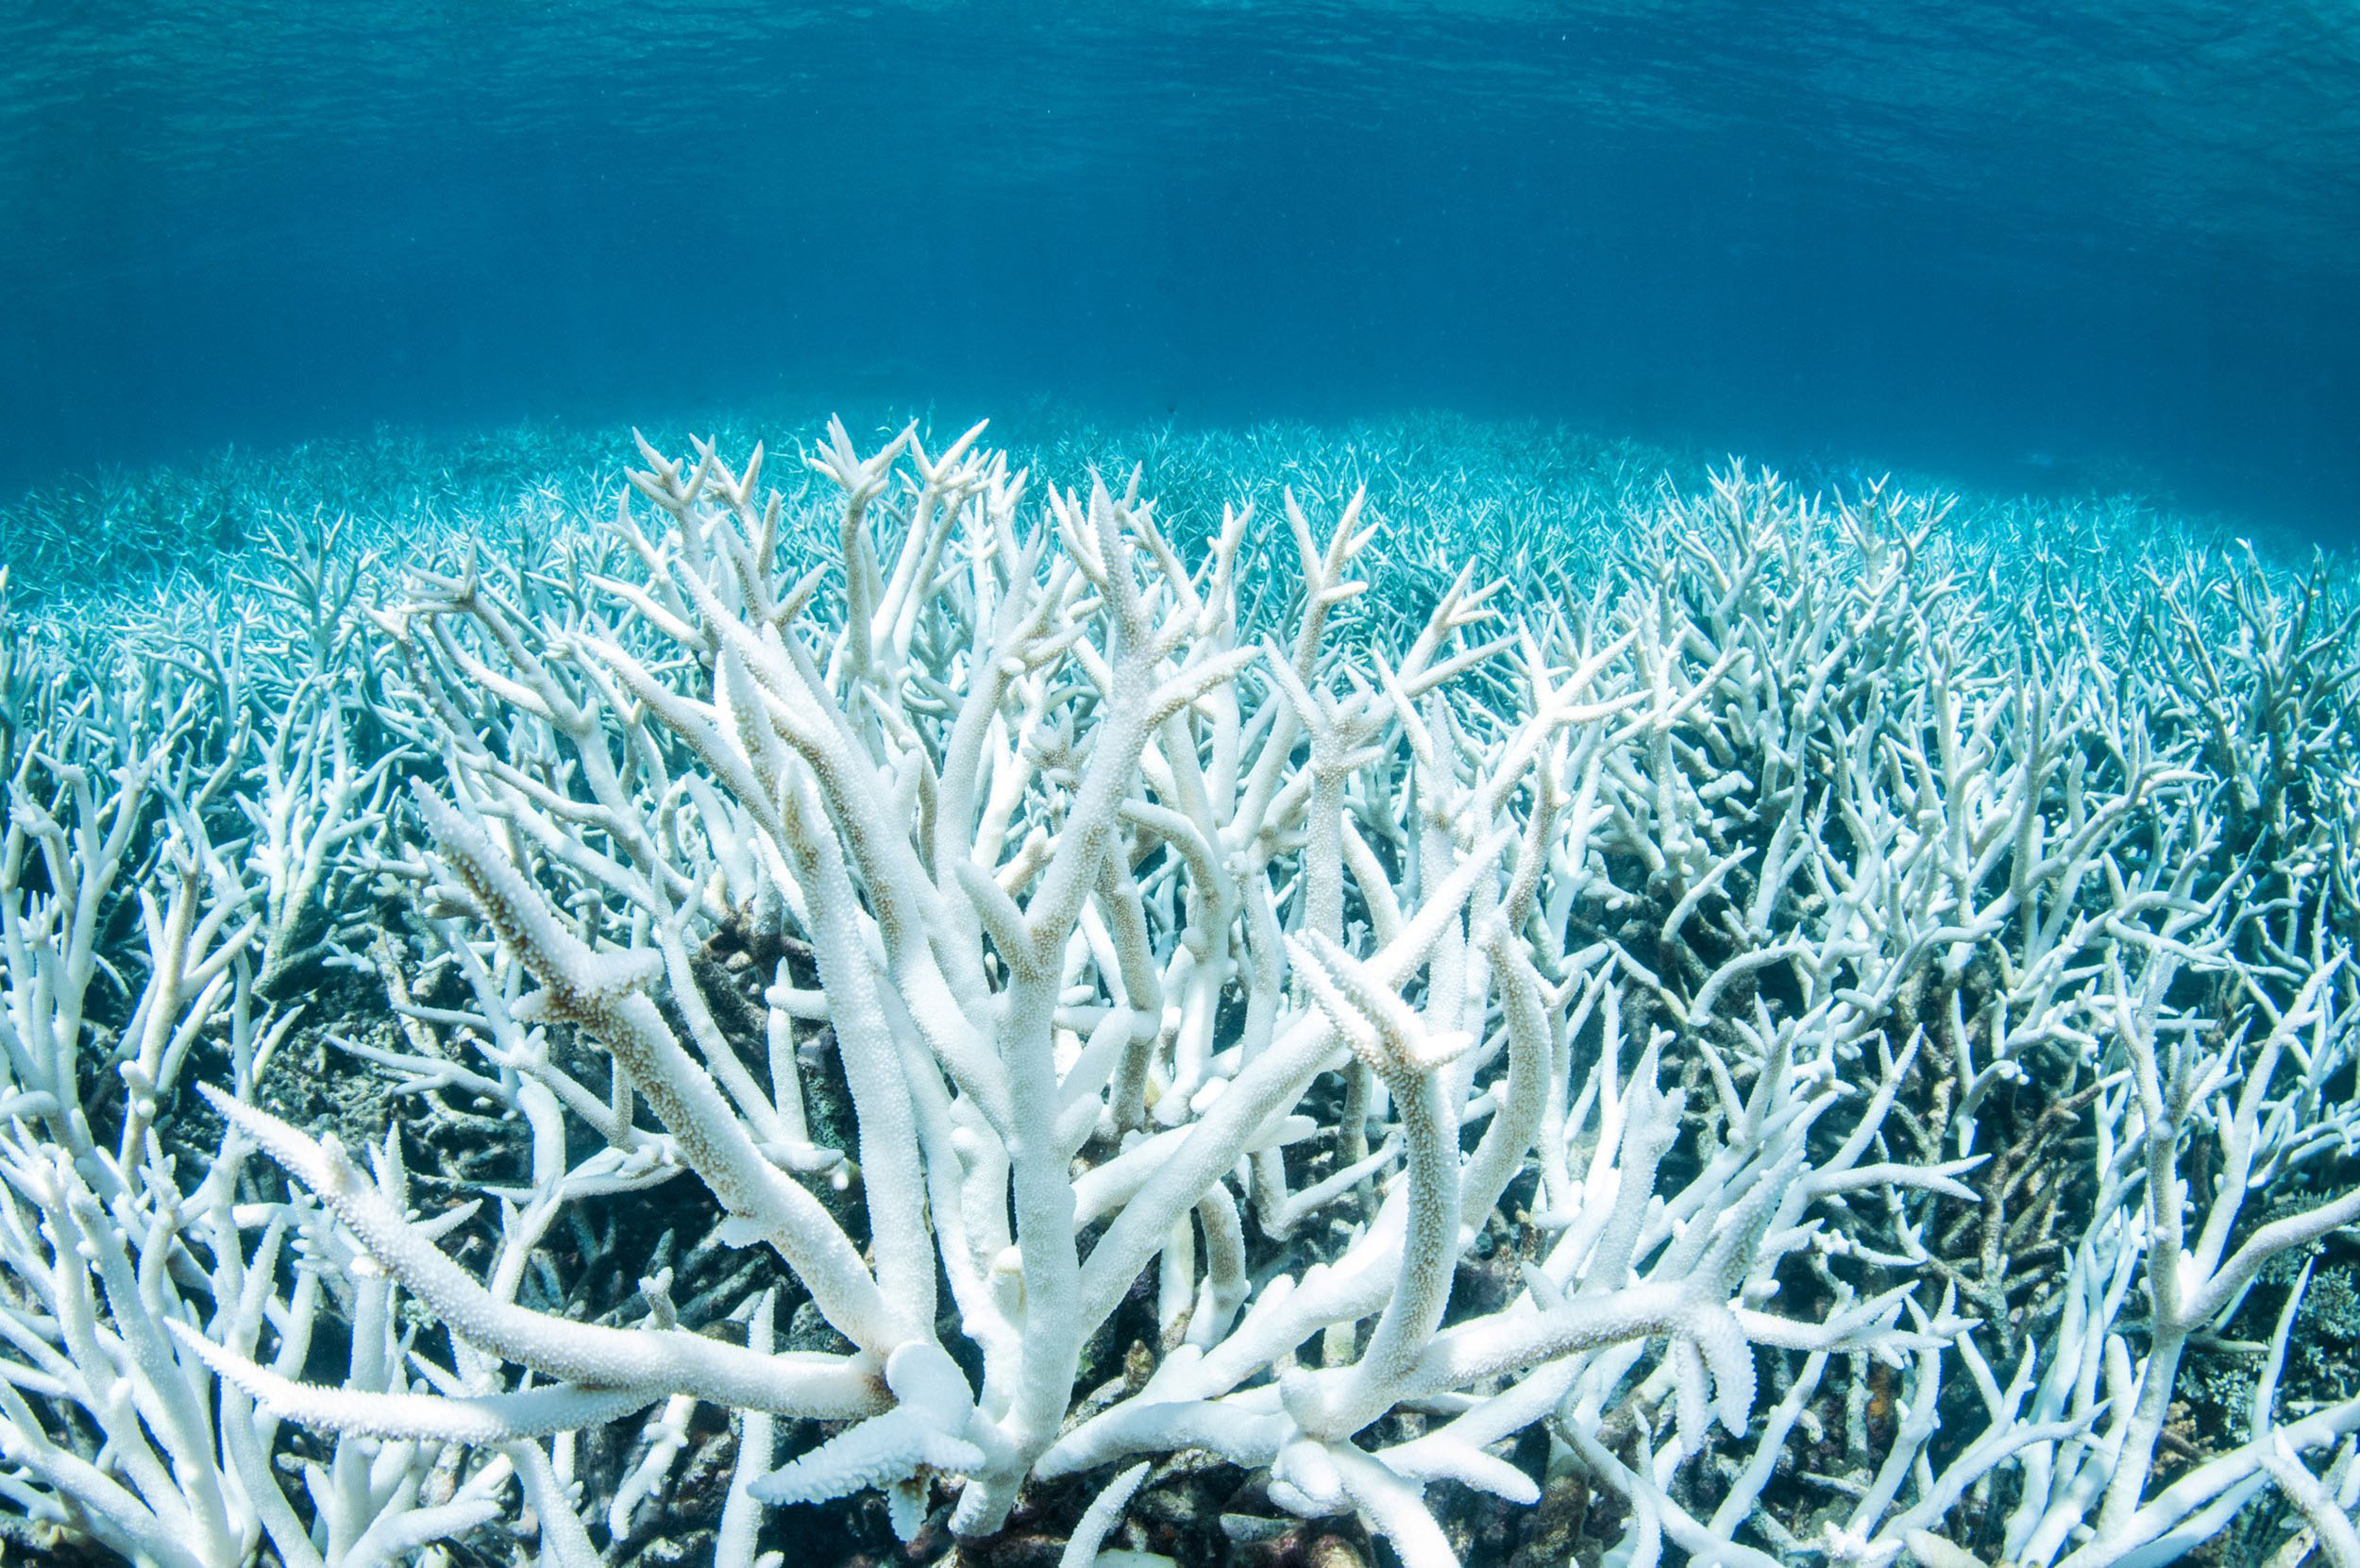 <p>caused by global warming</p><p>coral expels zooxanthellae, causing the coral to turn white</p><p>usually results in the death of the coral</p>